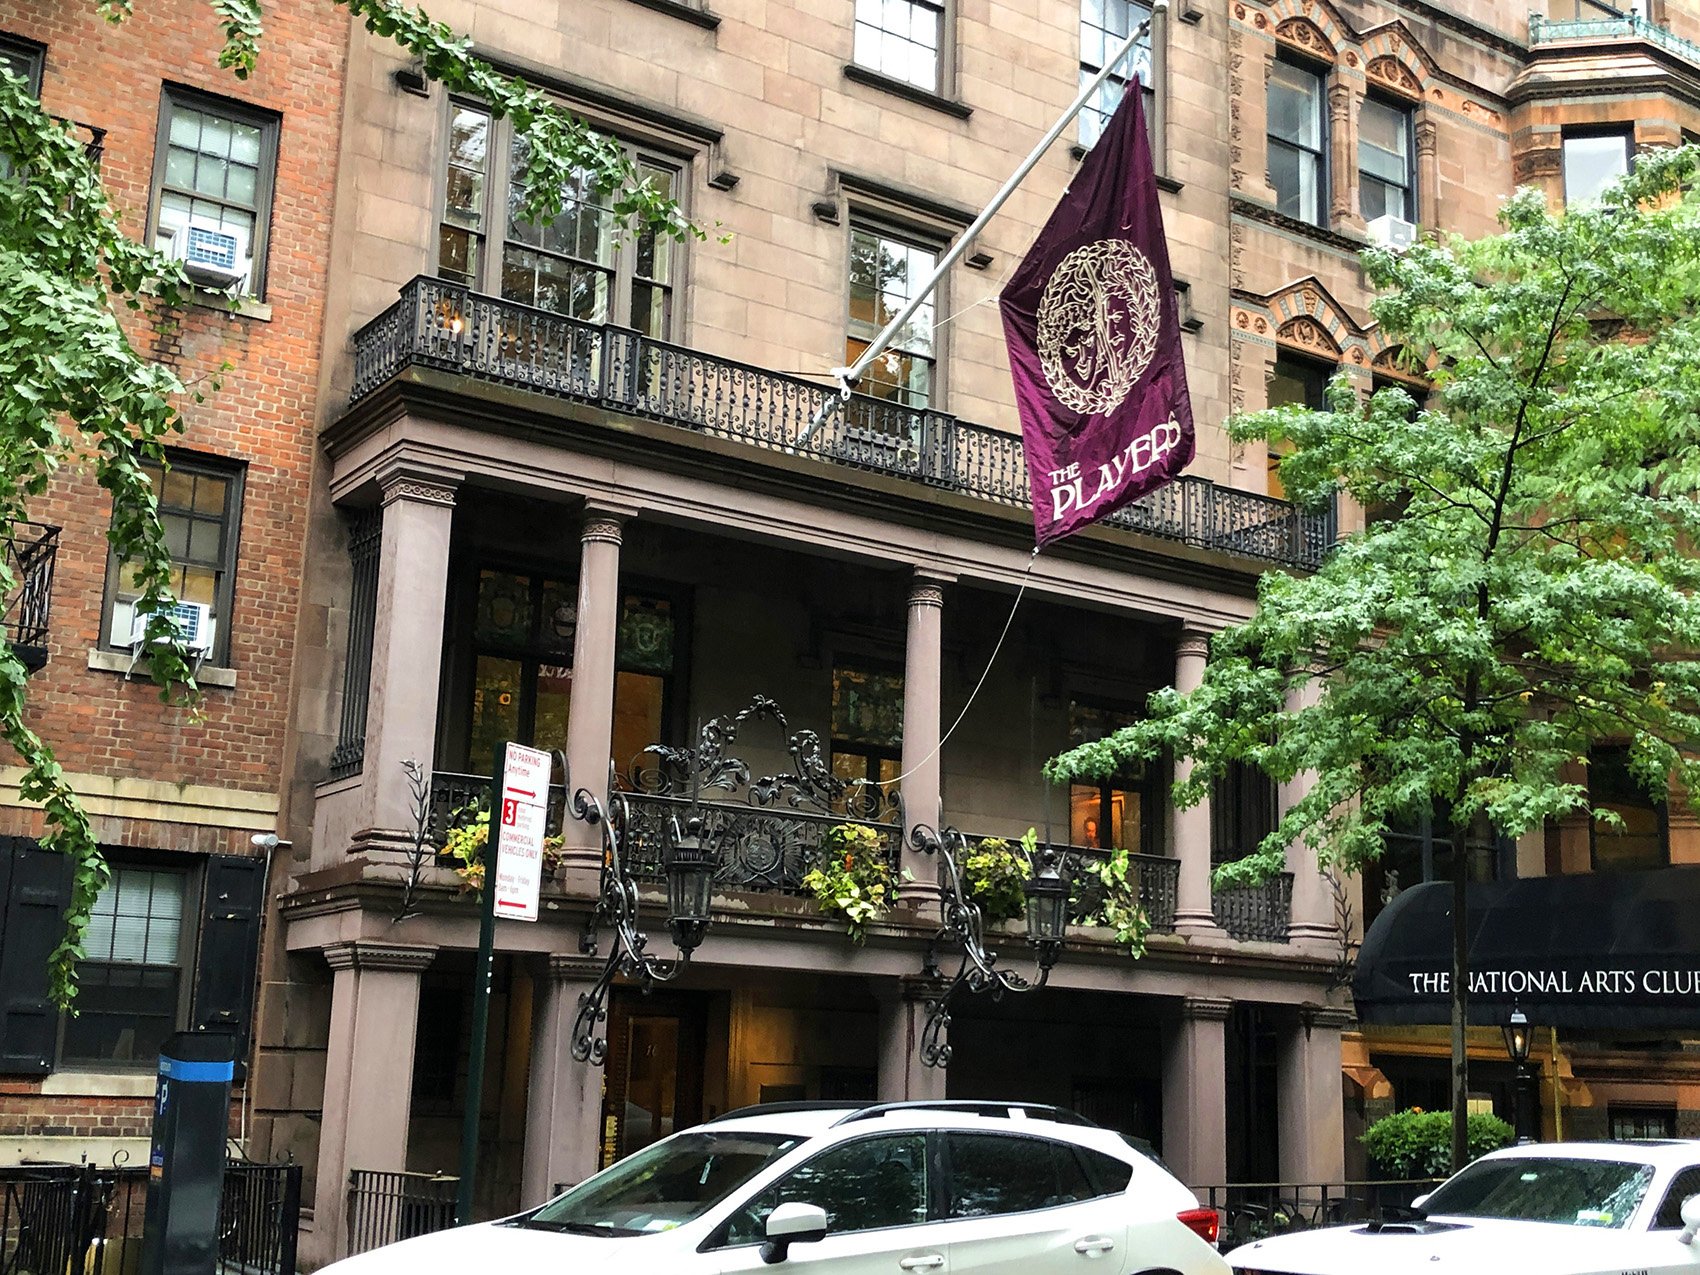  The historic Players Club, where the 2022 Idea Awards was held. 